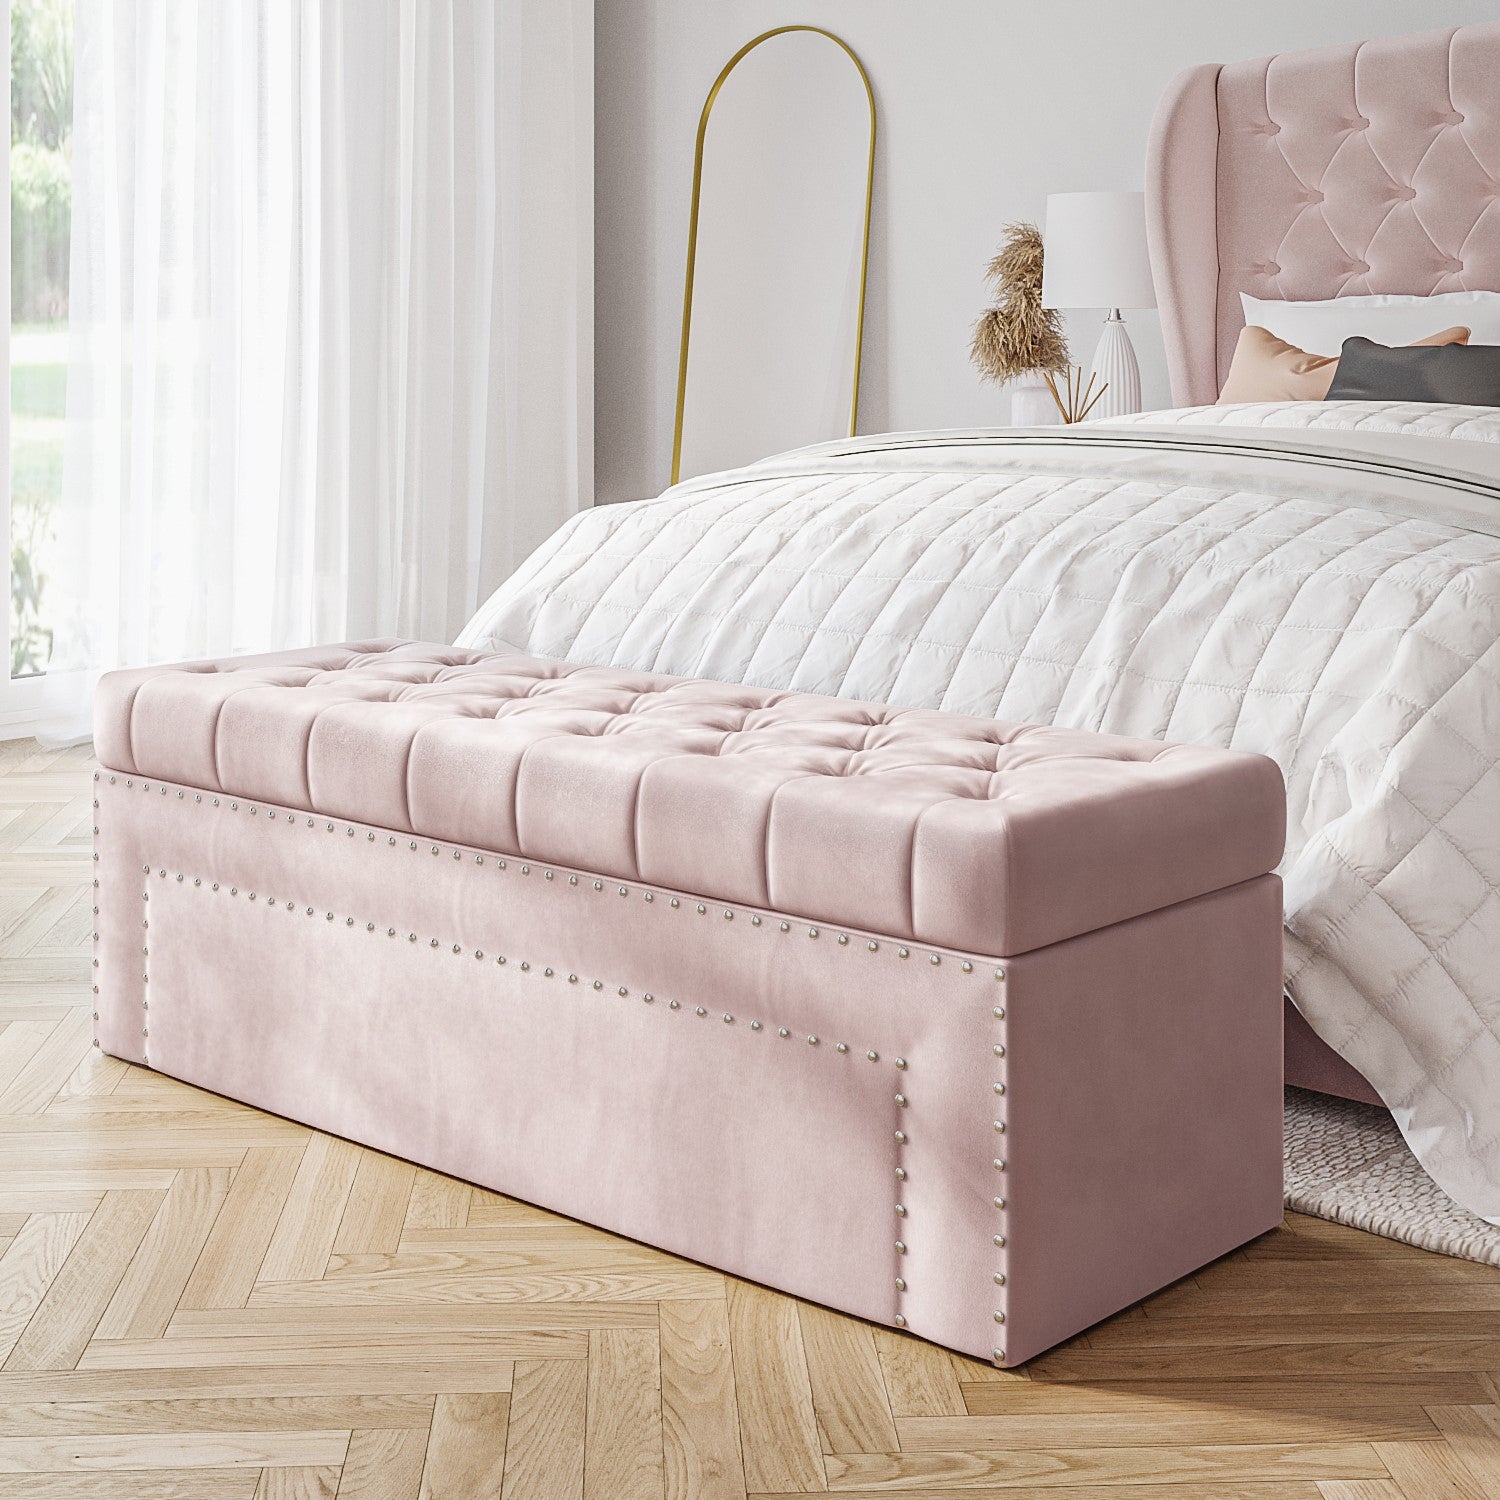 Baby Pink Plush Velvet Ottoman Storage Bench: A sleek and stylish ottoman with hidden storage. This multifunctional piece of furniture doubles as a comfortable seat and a discreet storage solution. Upholstered in a versatile fabric, it seamlessly complements any decor while providing ample space to stow away blankets, pillows, and other items. Perfect for adding both elegance and organization to your living space."